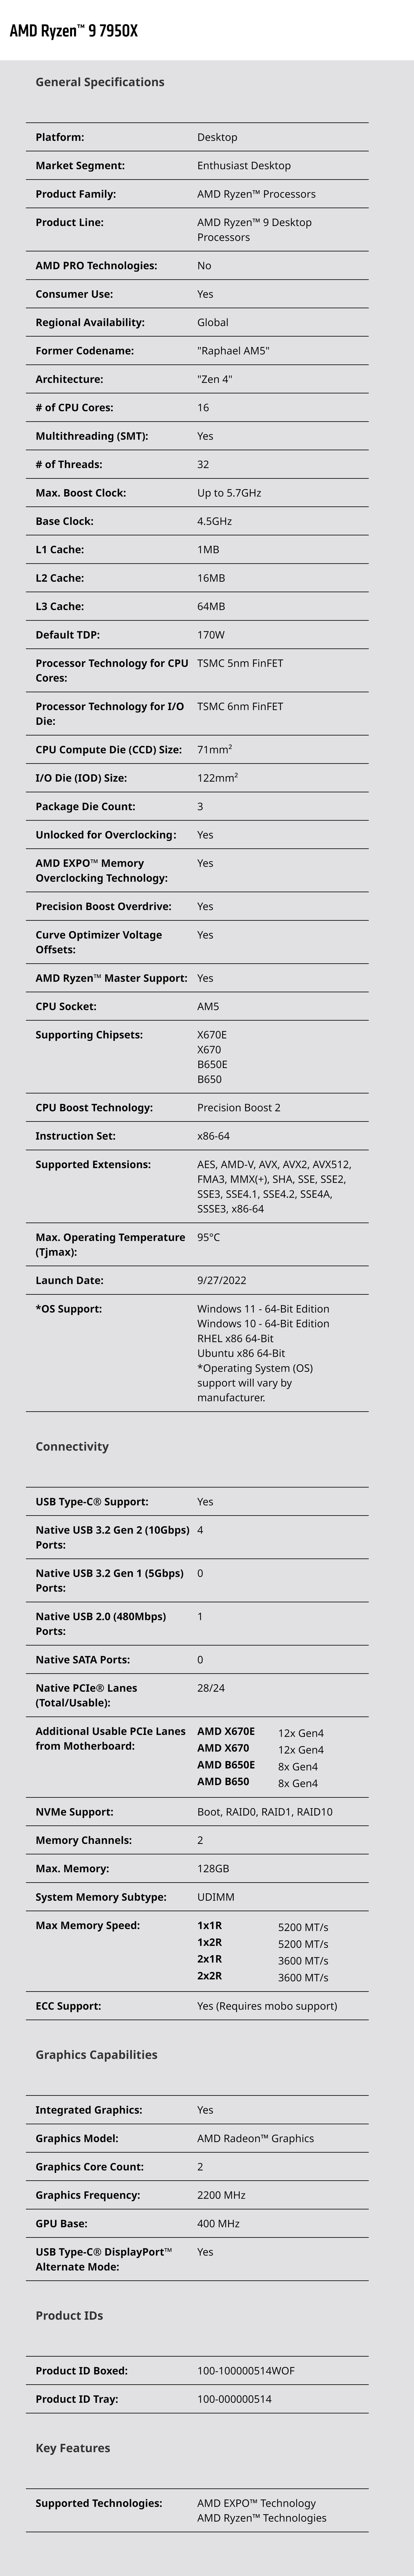 A large marketing image providing additional information about the product AMD Ryzen 9 7950X 16 Core 32 Thread Up To 5.7GHz AM5 - No HSF Retail Box - Additional alt info not provided